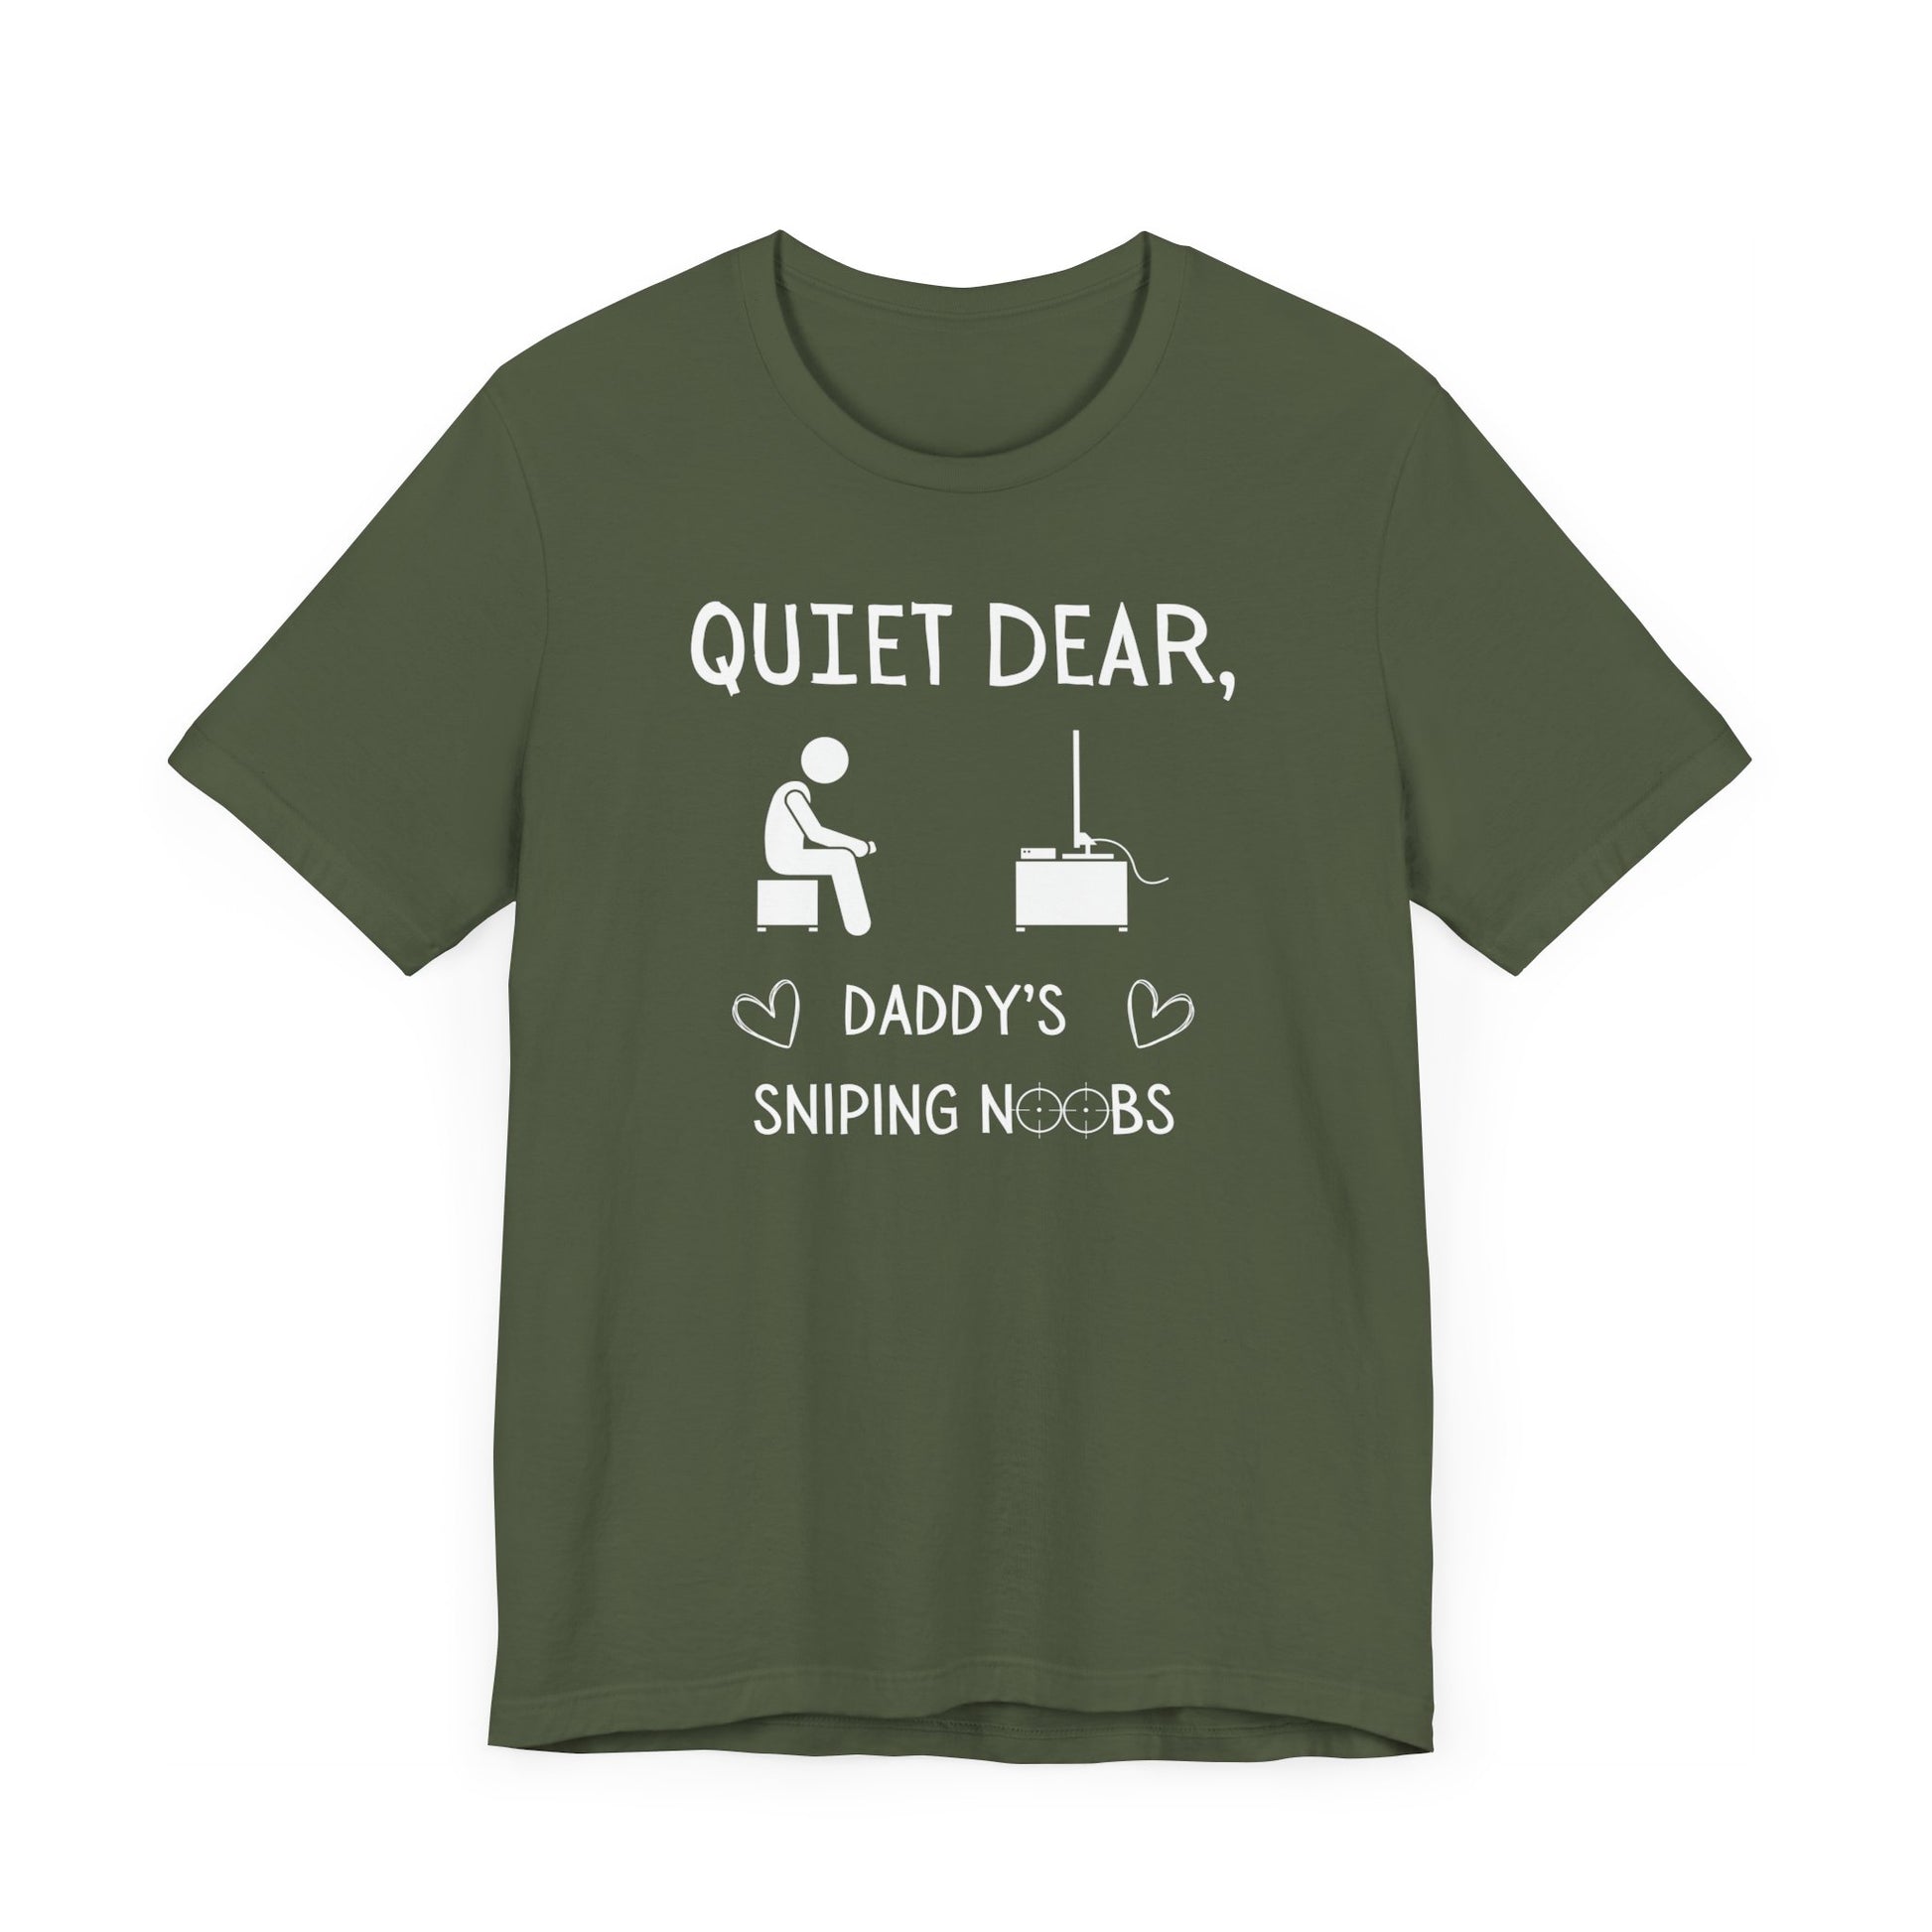 A flat image of a military green t-shirt that reads Quiet Dear, Daddy's Sniping Noobs in white text. The lower text is framed by two hearts, and the O's are in the shape of sniper scopes. In the center of the shirt is an image of a person holding a controller sitting across from a TV.